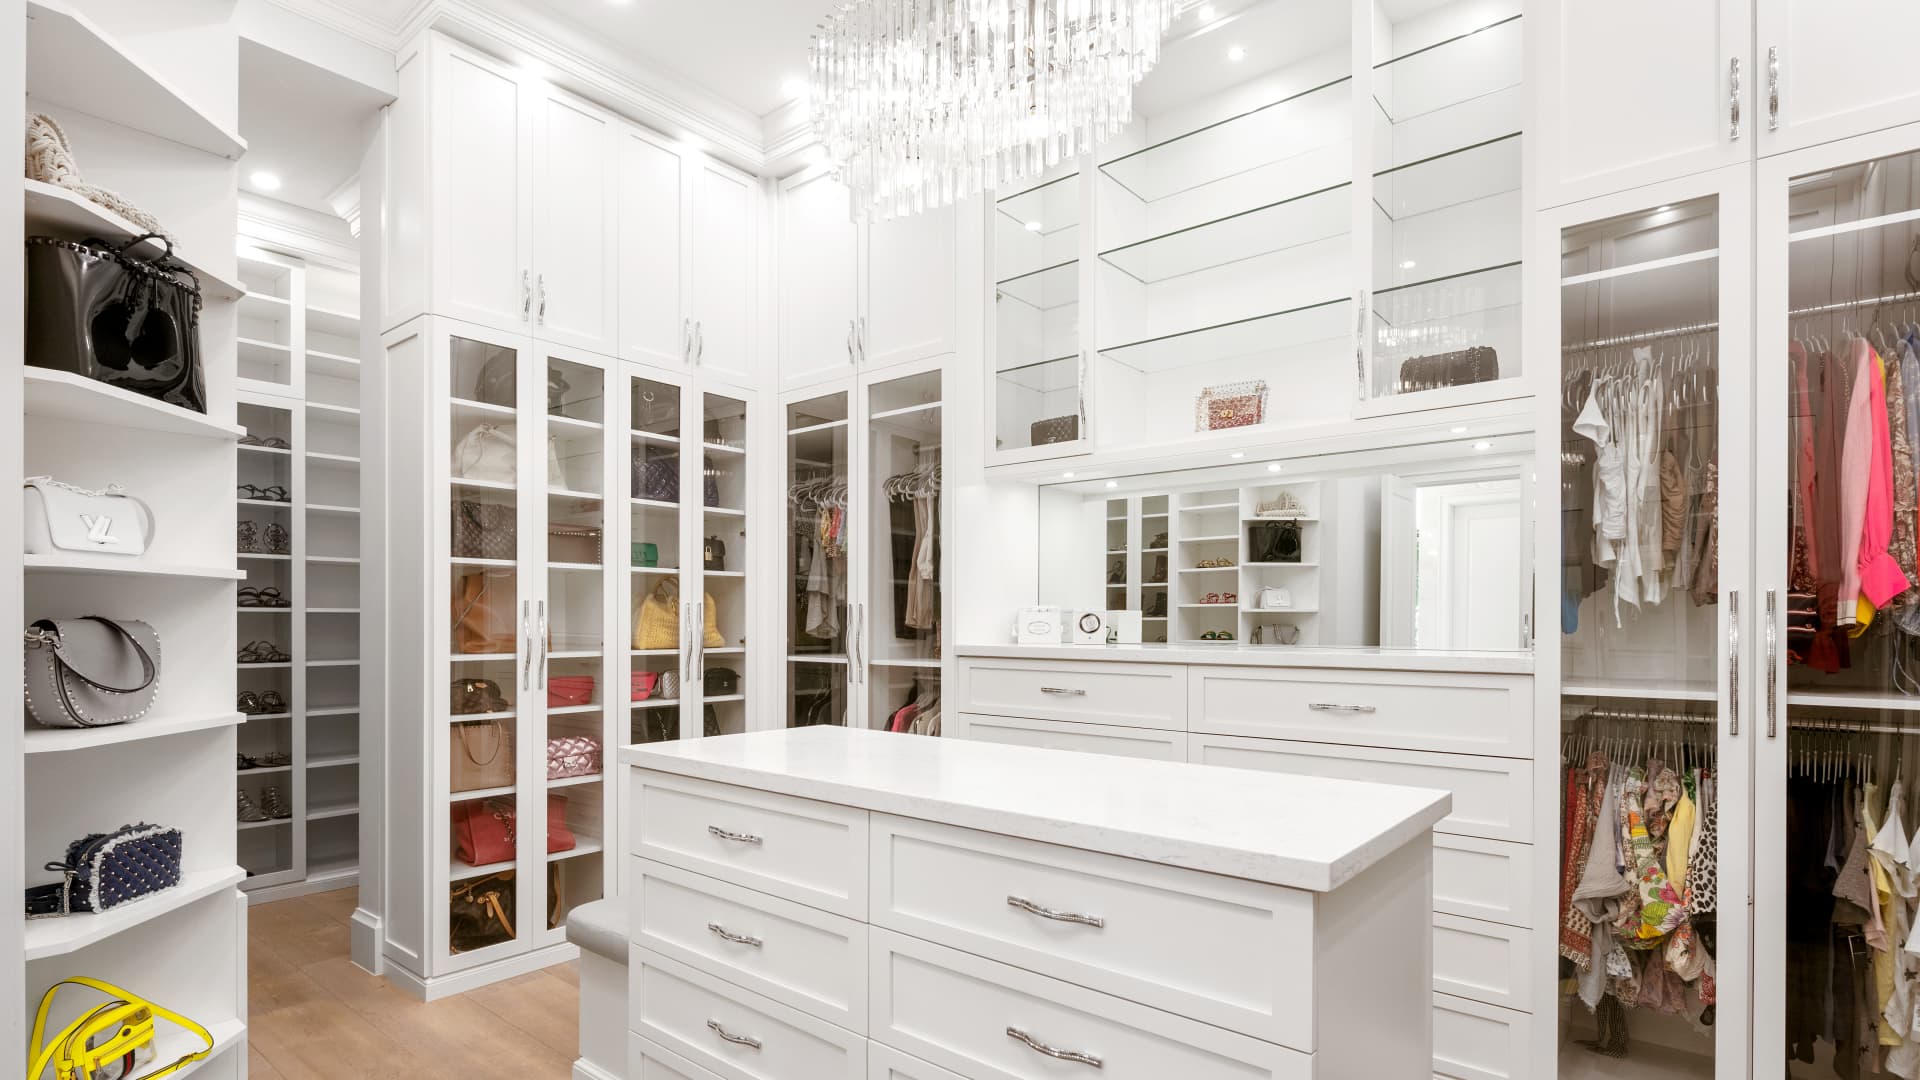 One of two owner's suite walk-in closets.